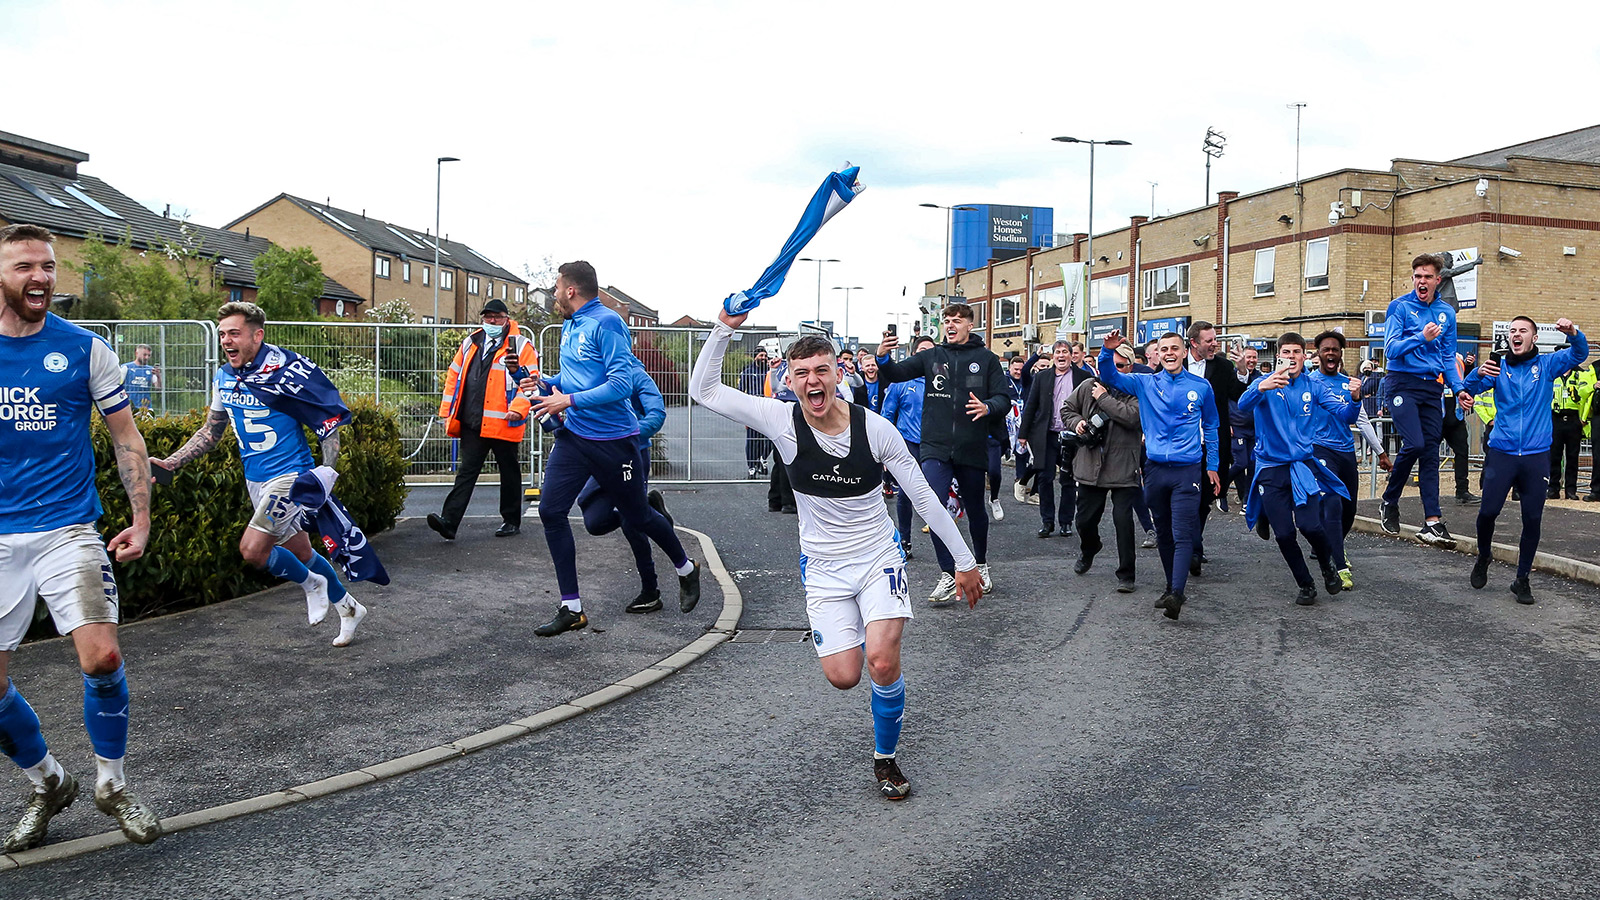 1st May '21 | Harrison Burrows rushes to share celebrating promotion with supporters outside the Weston Homes Stadium